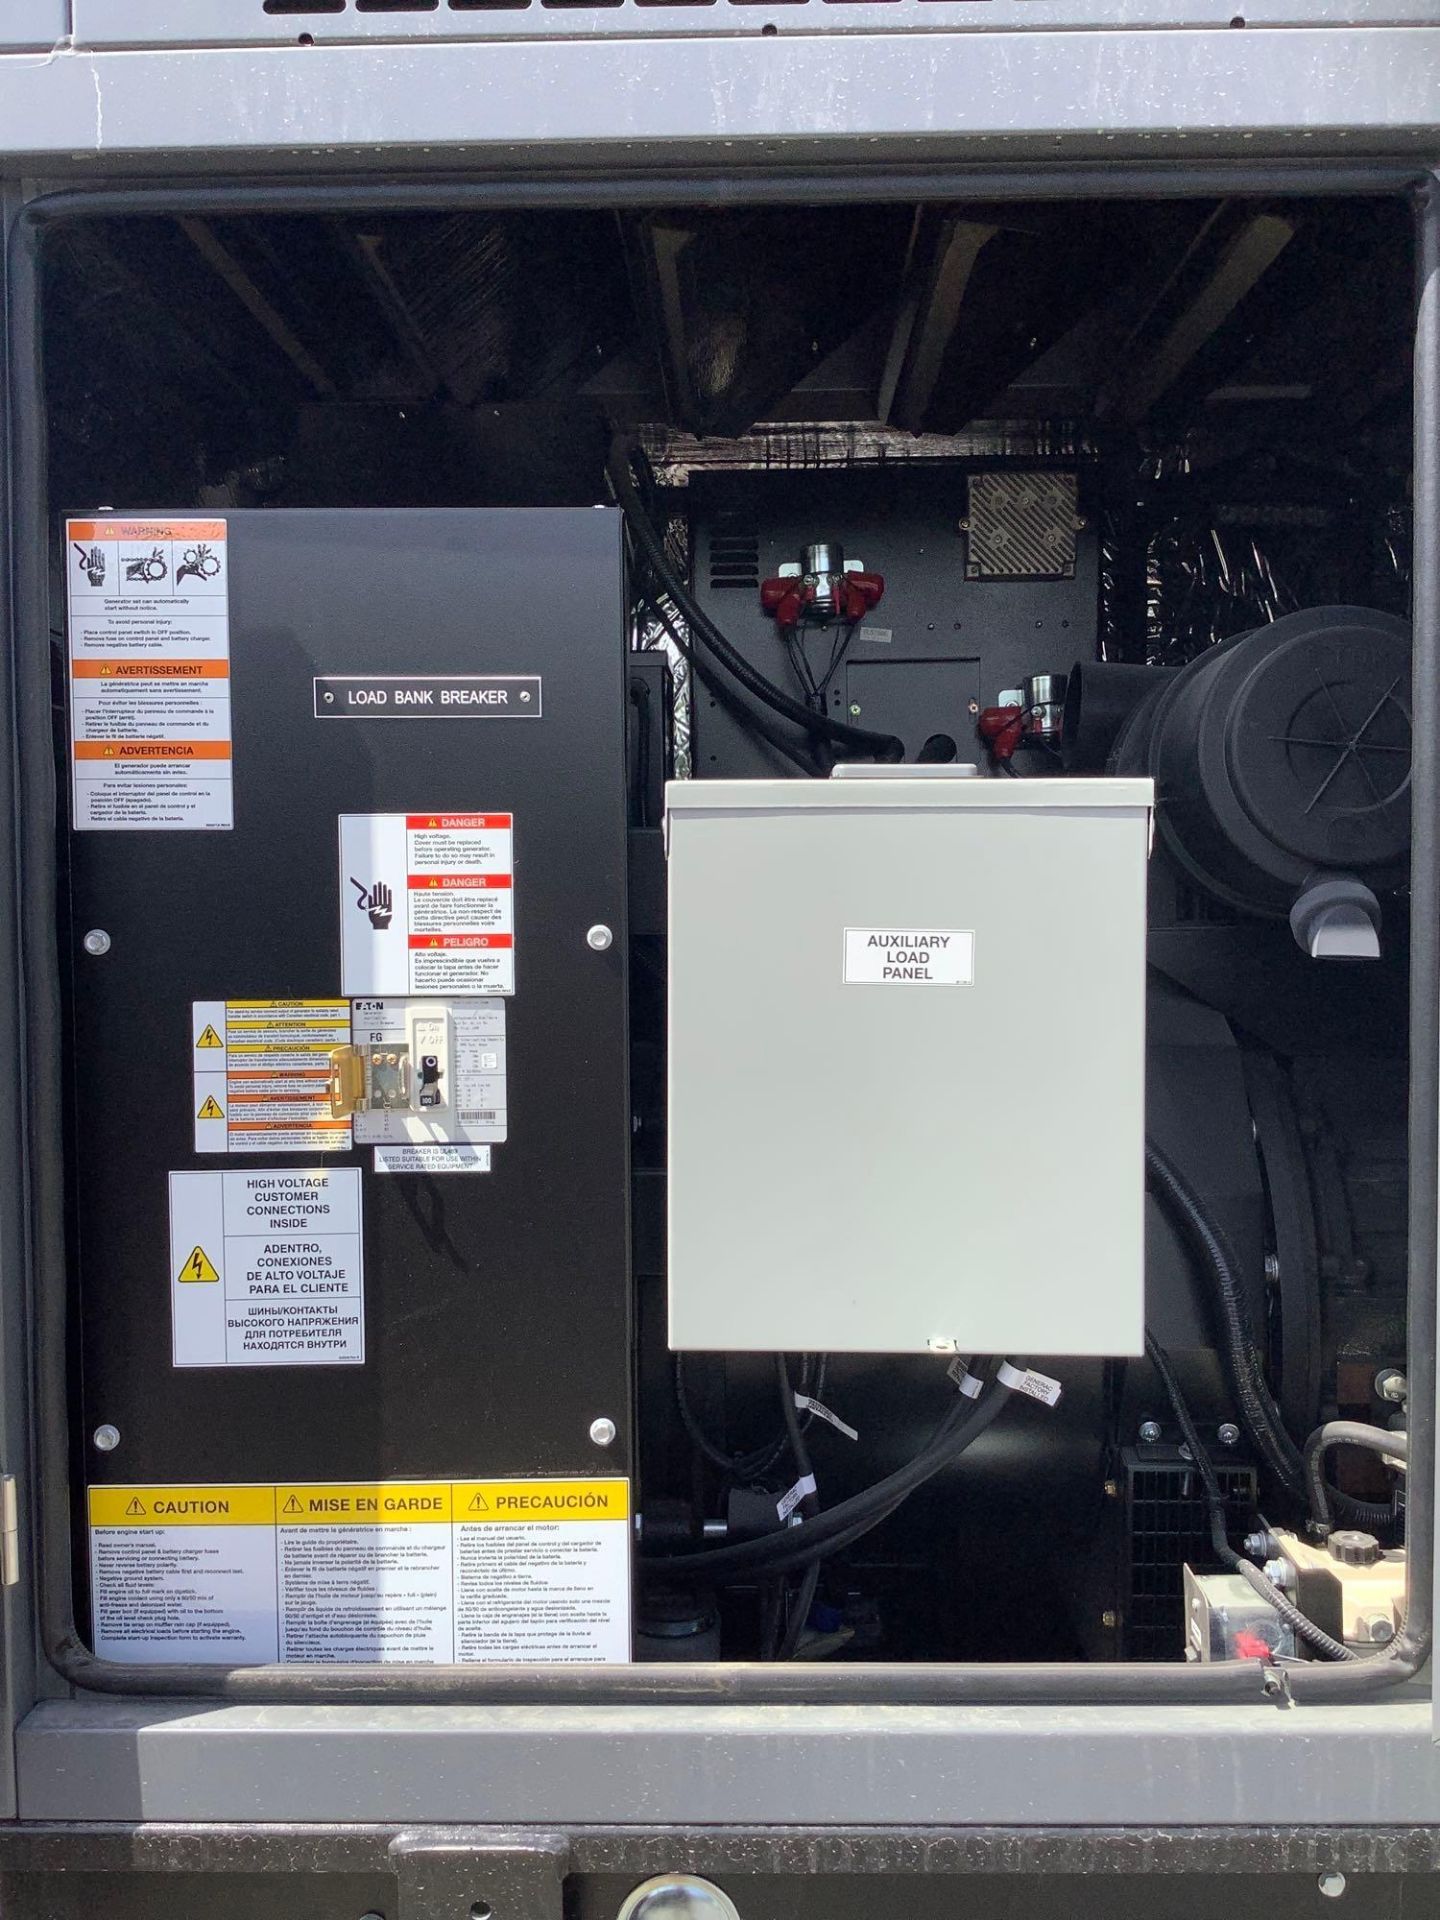 UNUSED GENERAC 10 KW DIESEL GENERATOR MODEL SD010, BACK-UP UNIT/NEVER BEEN USED, APPROX 60HZ, PHASE - Image 3 of 21